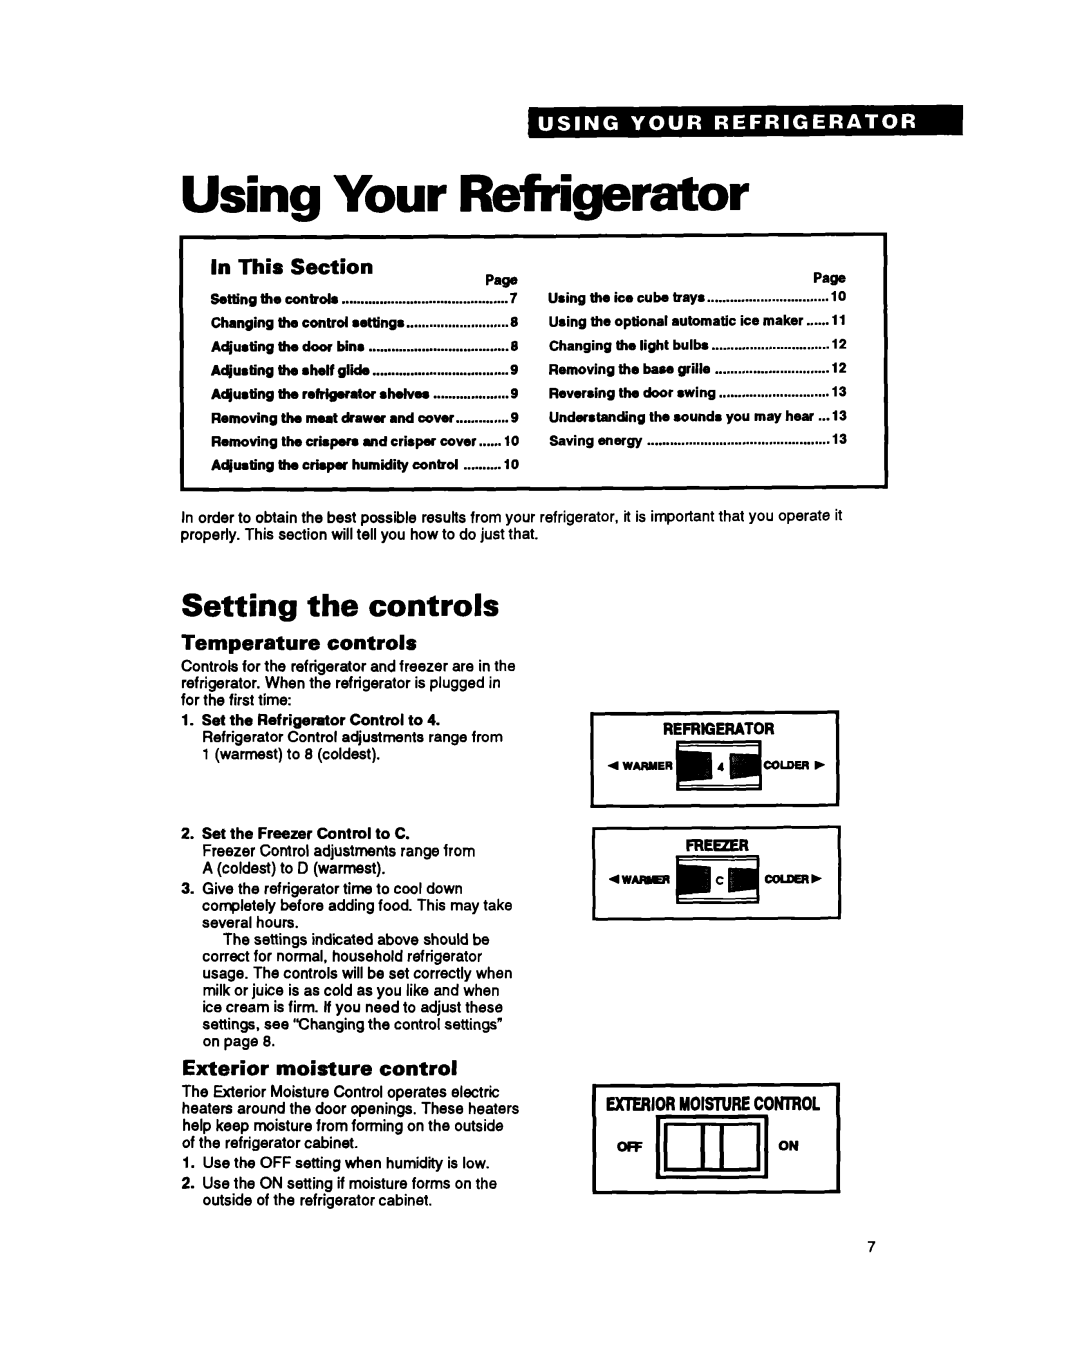 Whirlpool ET25PK warranty Using Your Refrigerator, Setting the controls, In This, Section, Temperature controls 